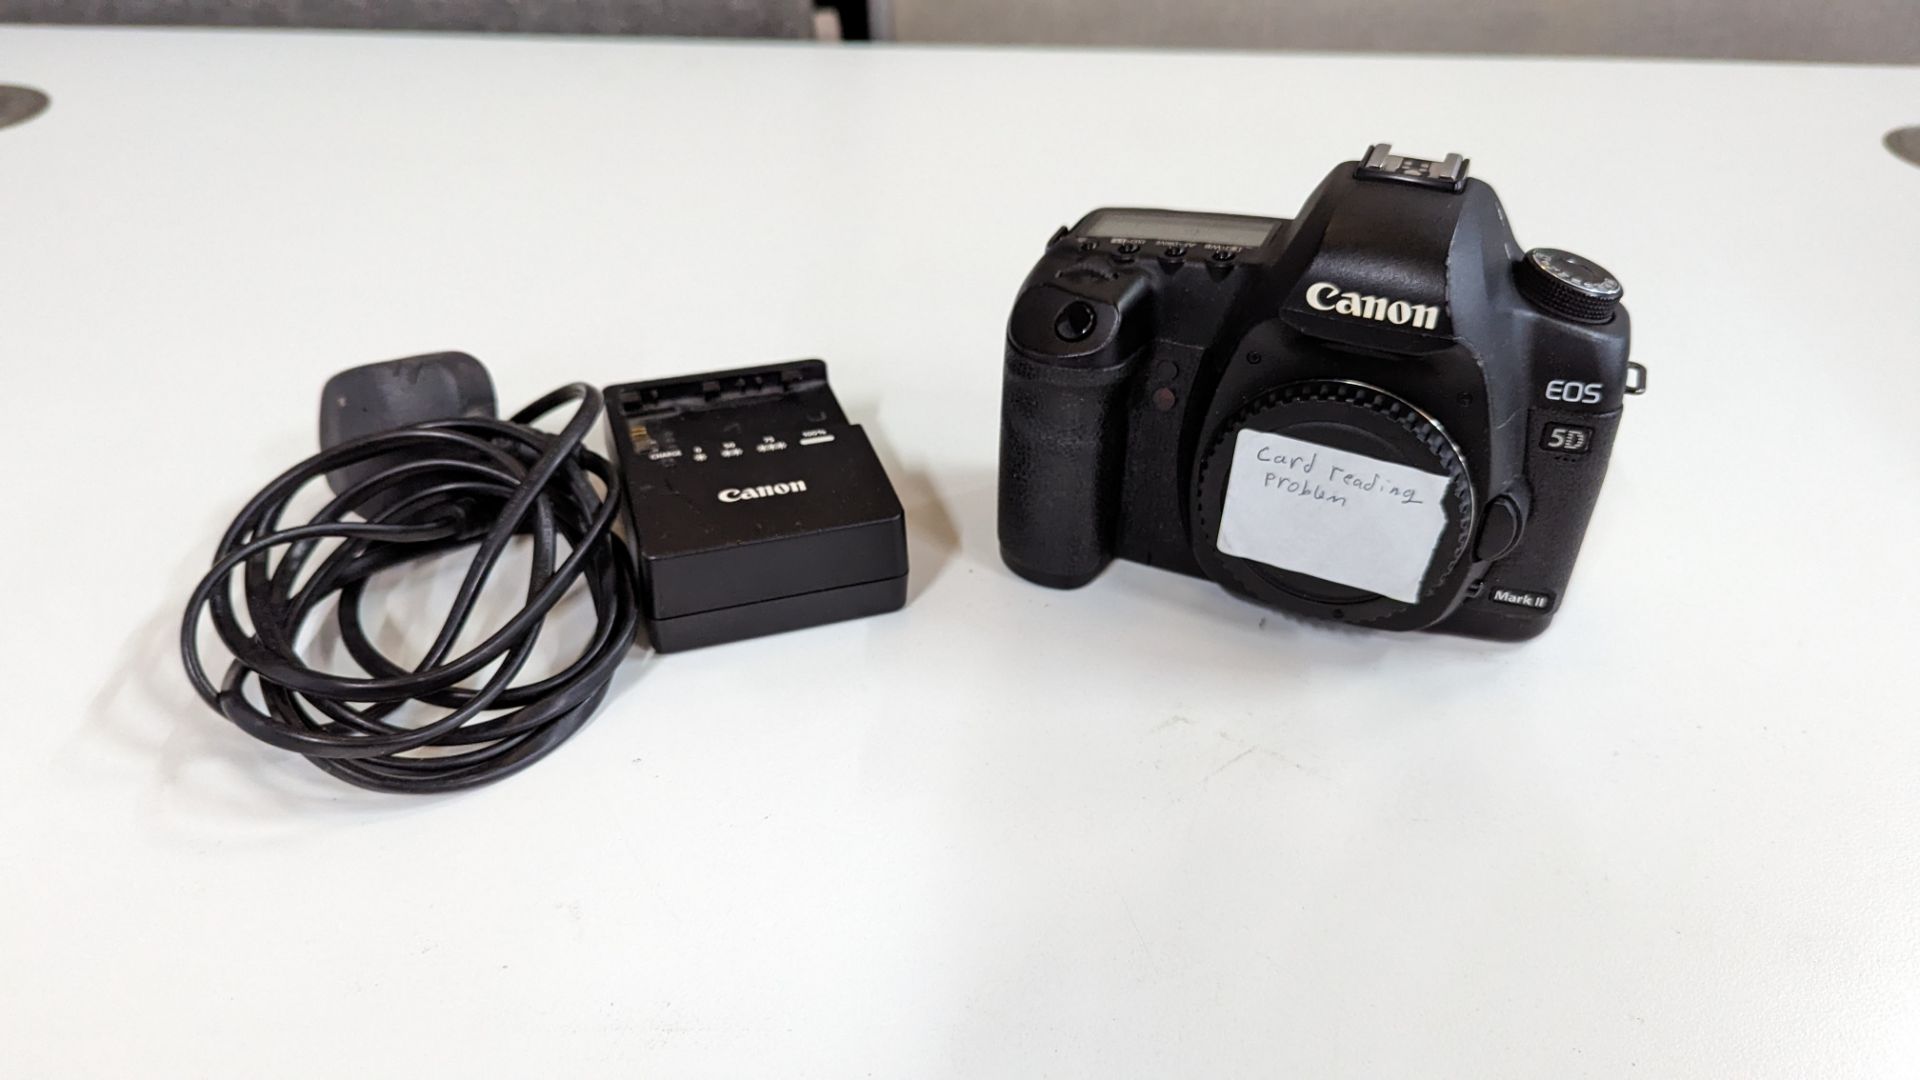 Canon EOS 5D Mark II digital camera plus Canon battery charger. N.B. no lens or battery included wi - Image 2 of 10